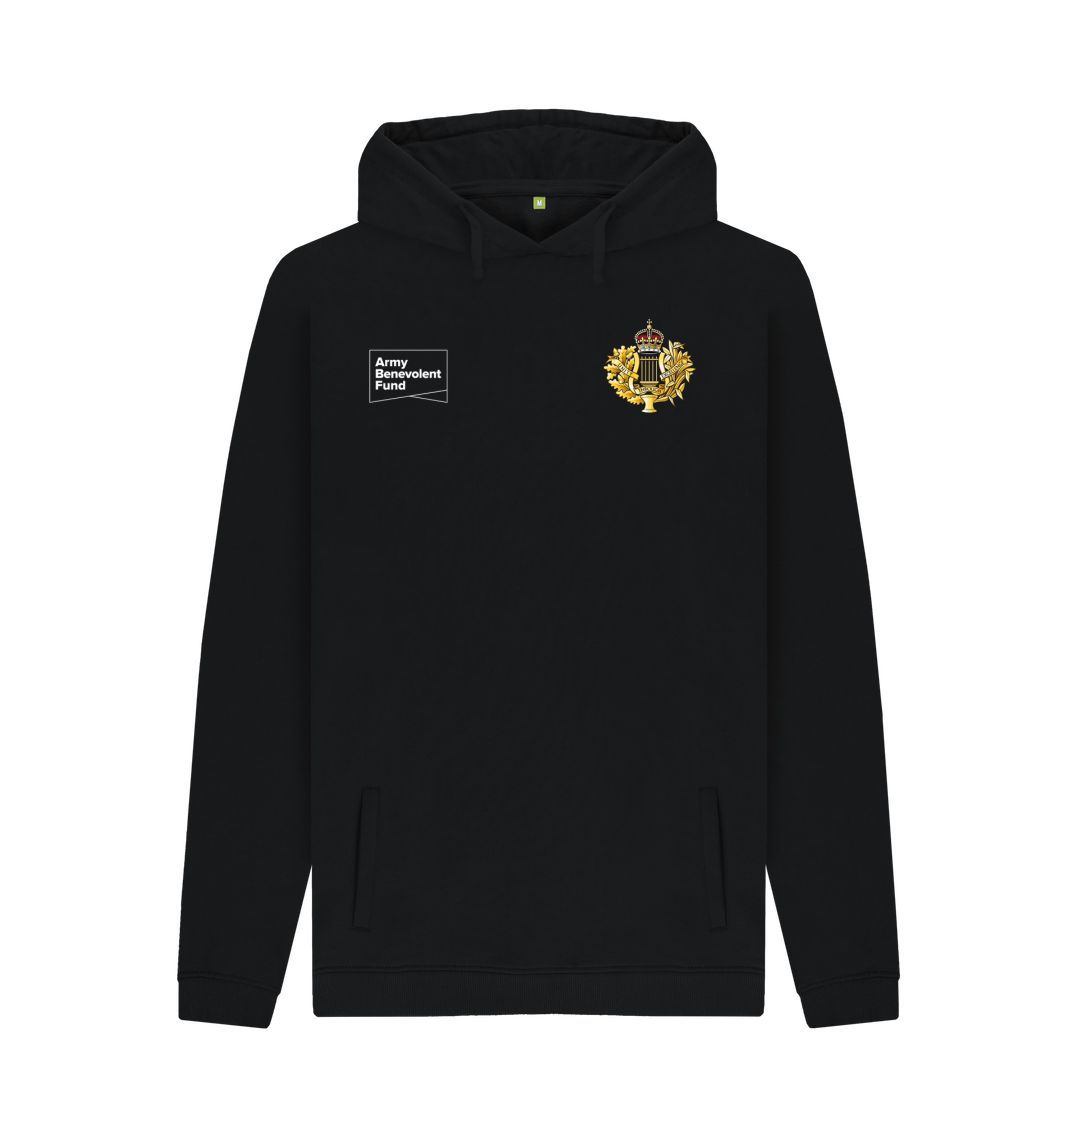 Corps of Army Music Unisex Hoodie - Army Benevolent Fund